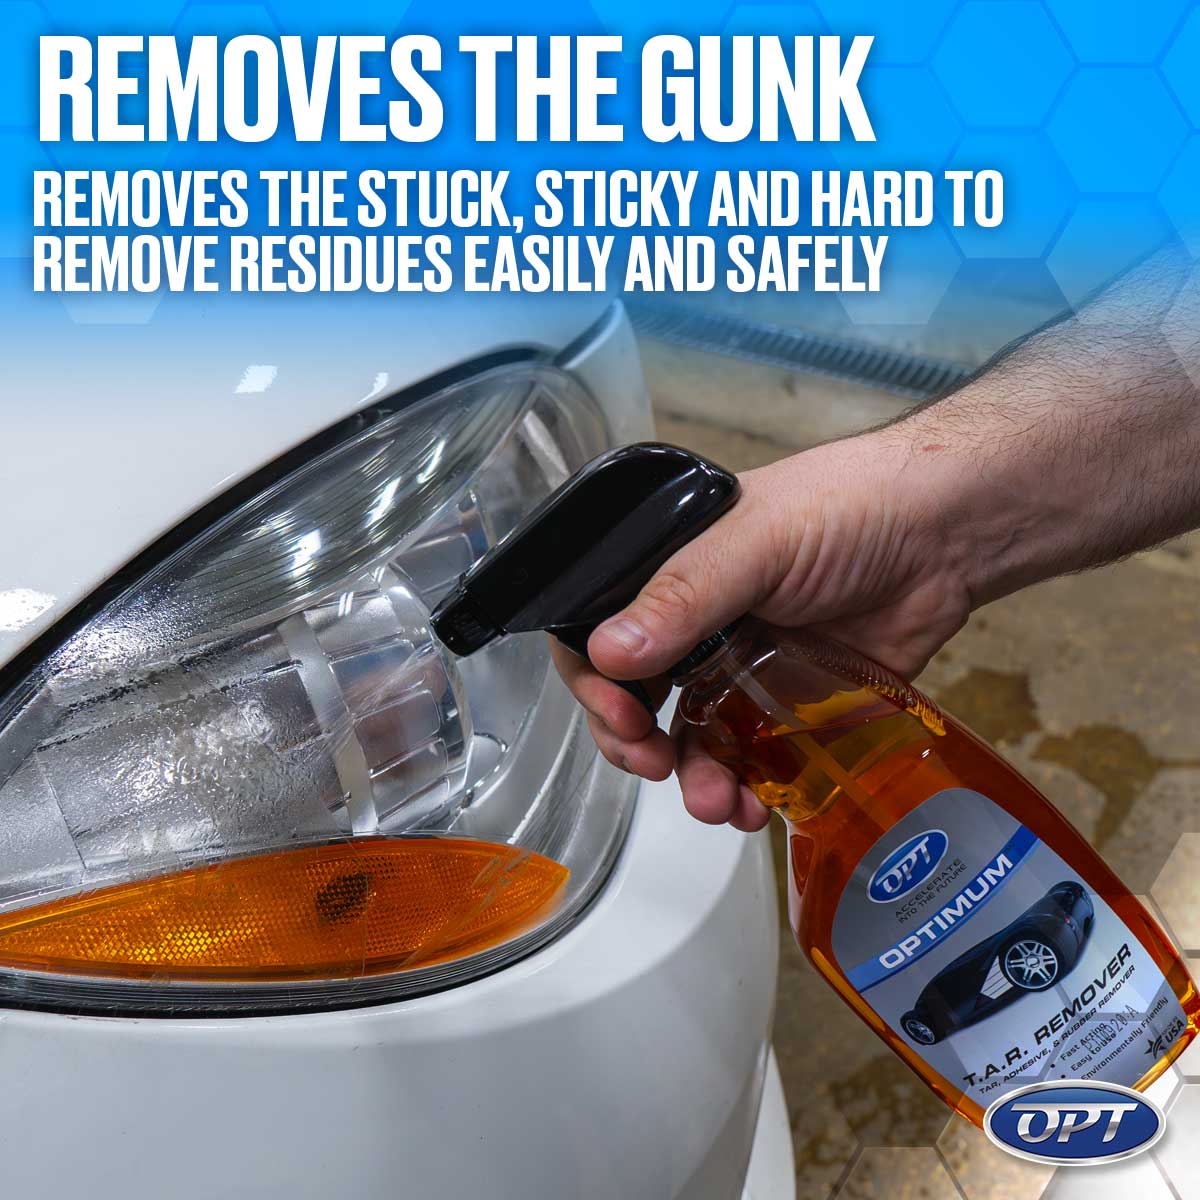 How to remove sticker residues from car - 3D Gum and Tar Remover